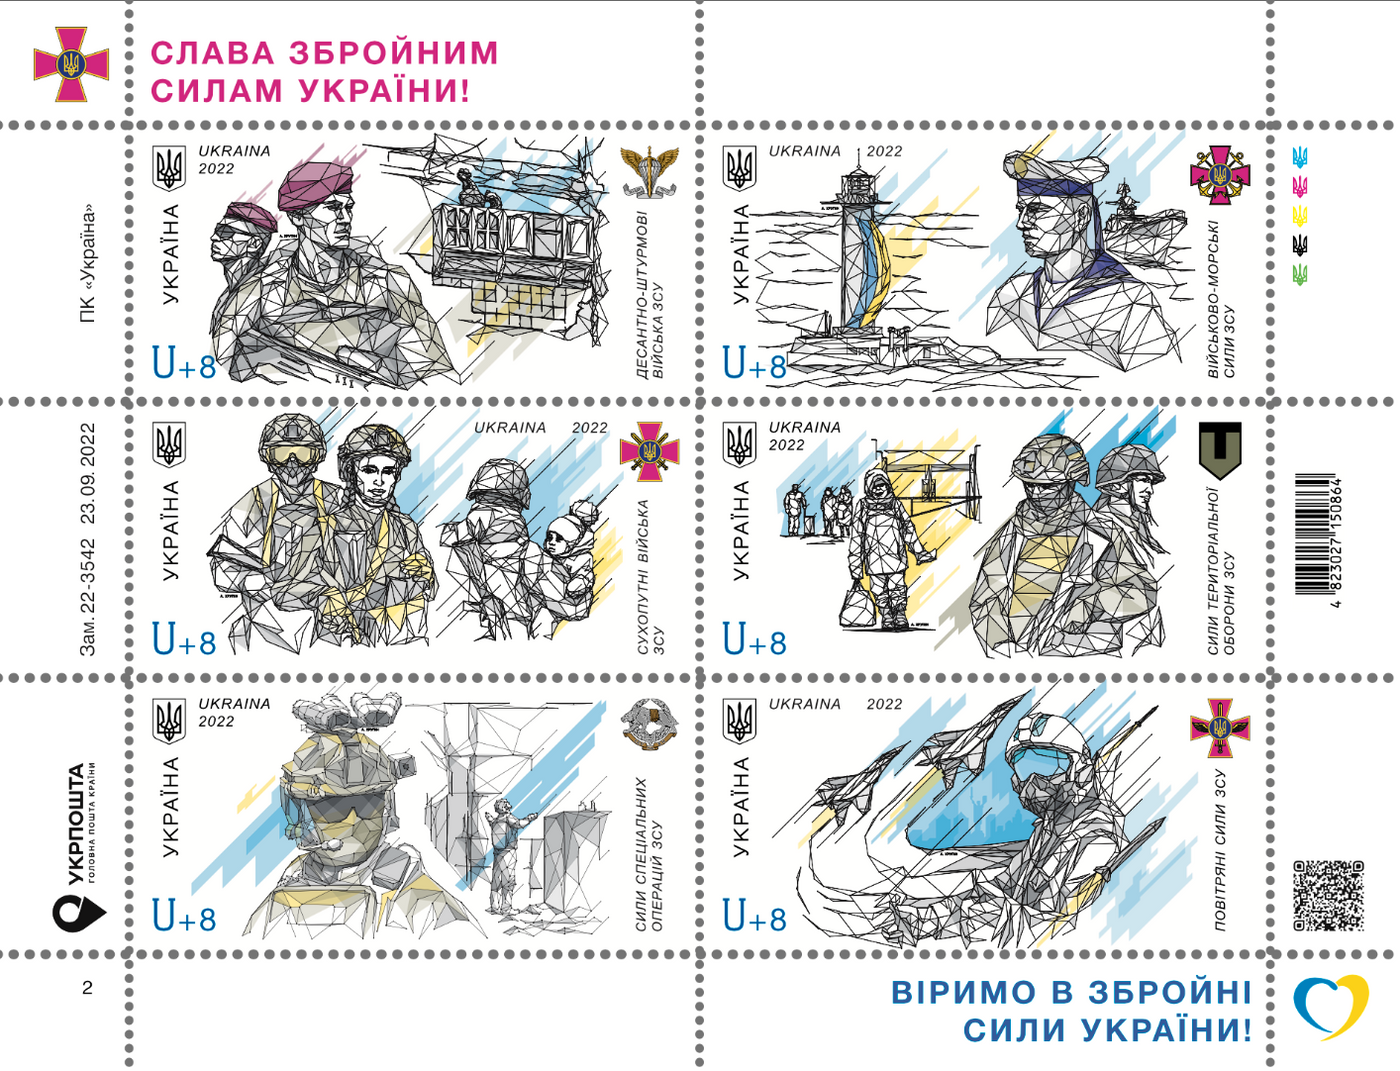 "Glory to the Armed Forces of Ukraine!", Stamp Sheet, U